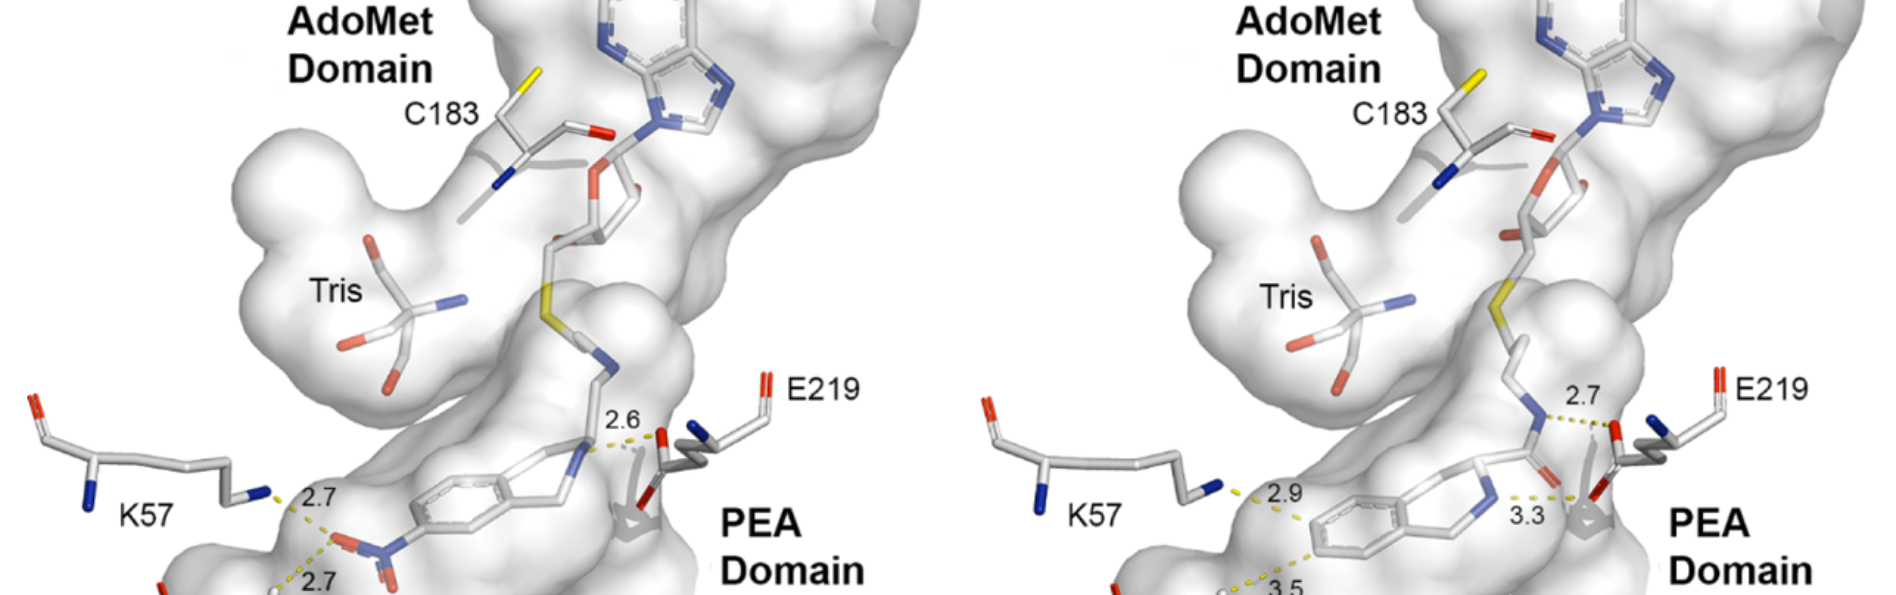 Structure-based drug design of bisubstrate inhibitors of phenylethanolamine N‐Methyltransferase possessing low nanomolar affinity at both substrate binding domains